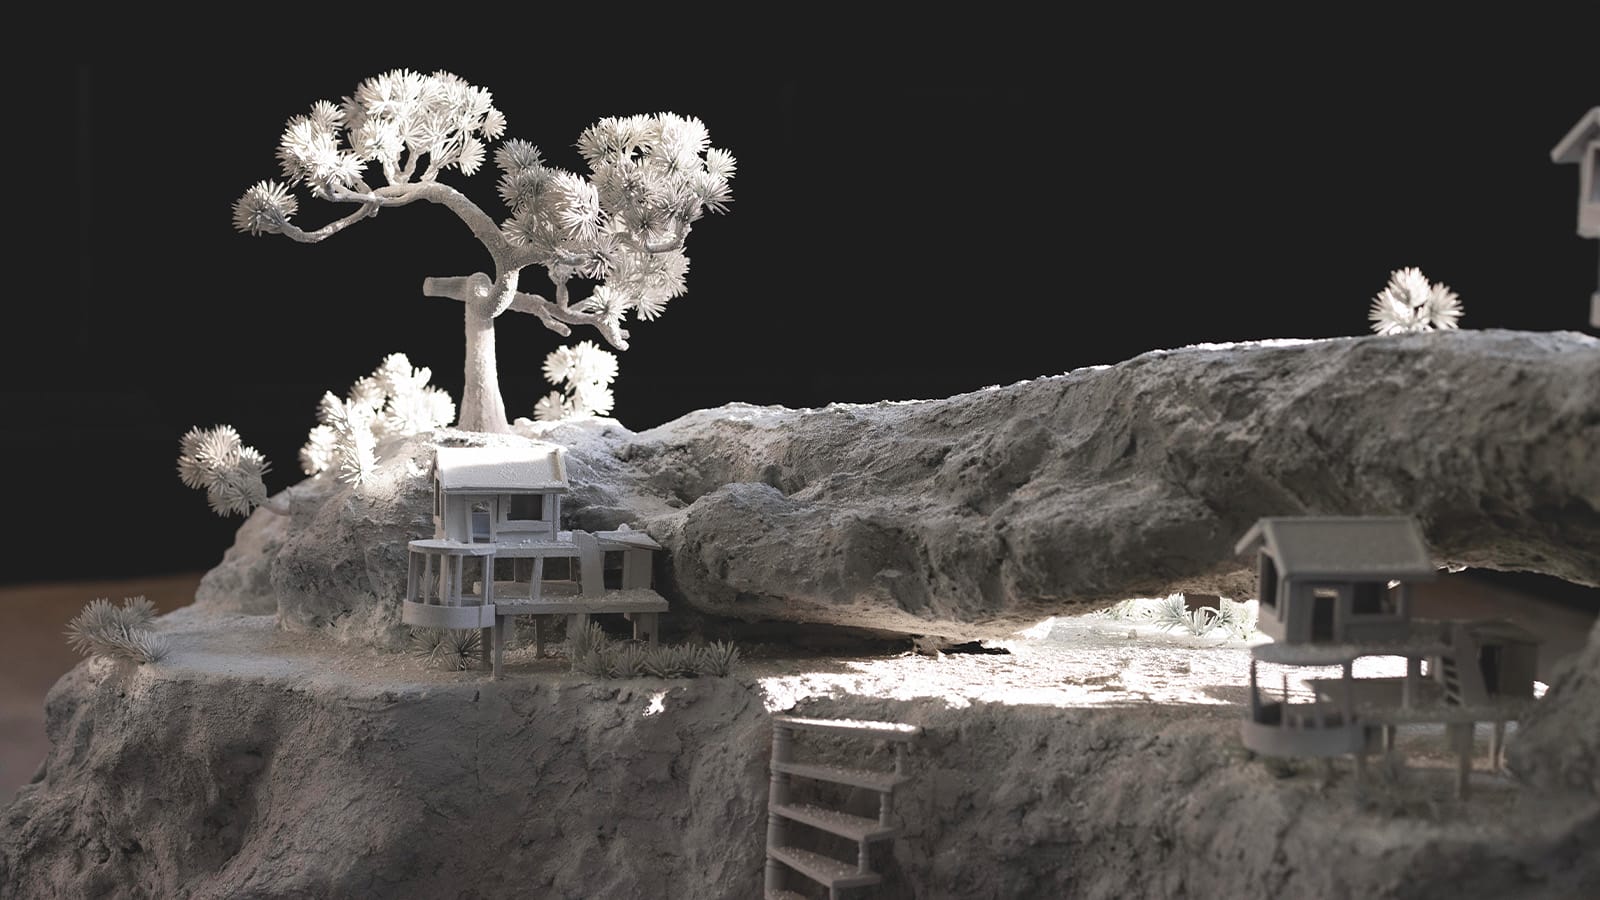 A grey sculpture of a tree and a house on a desolate rock landscape